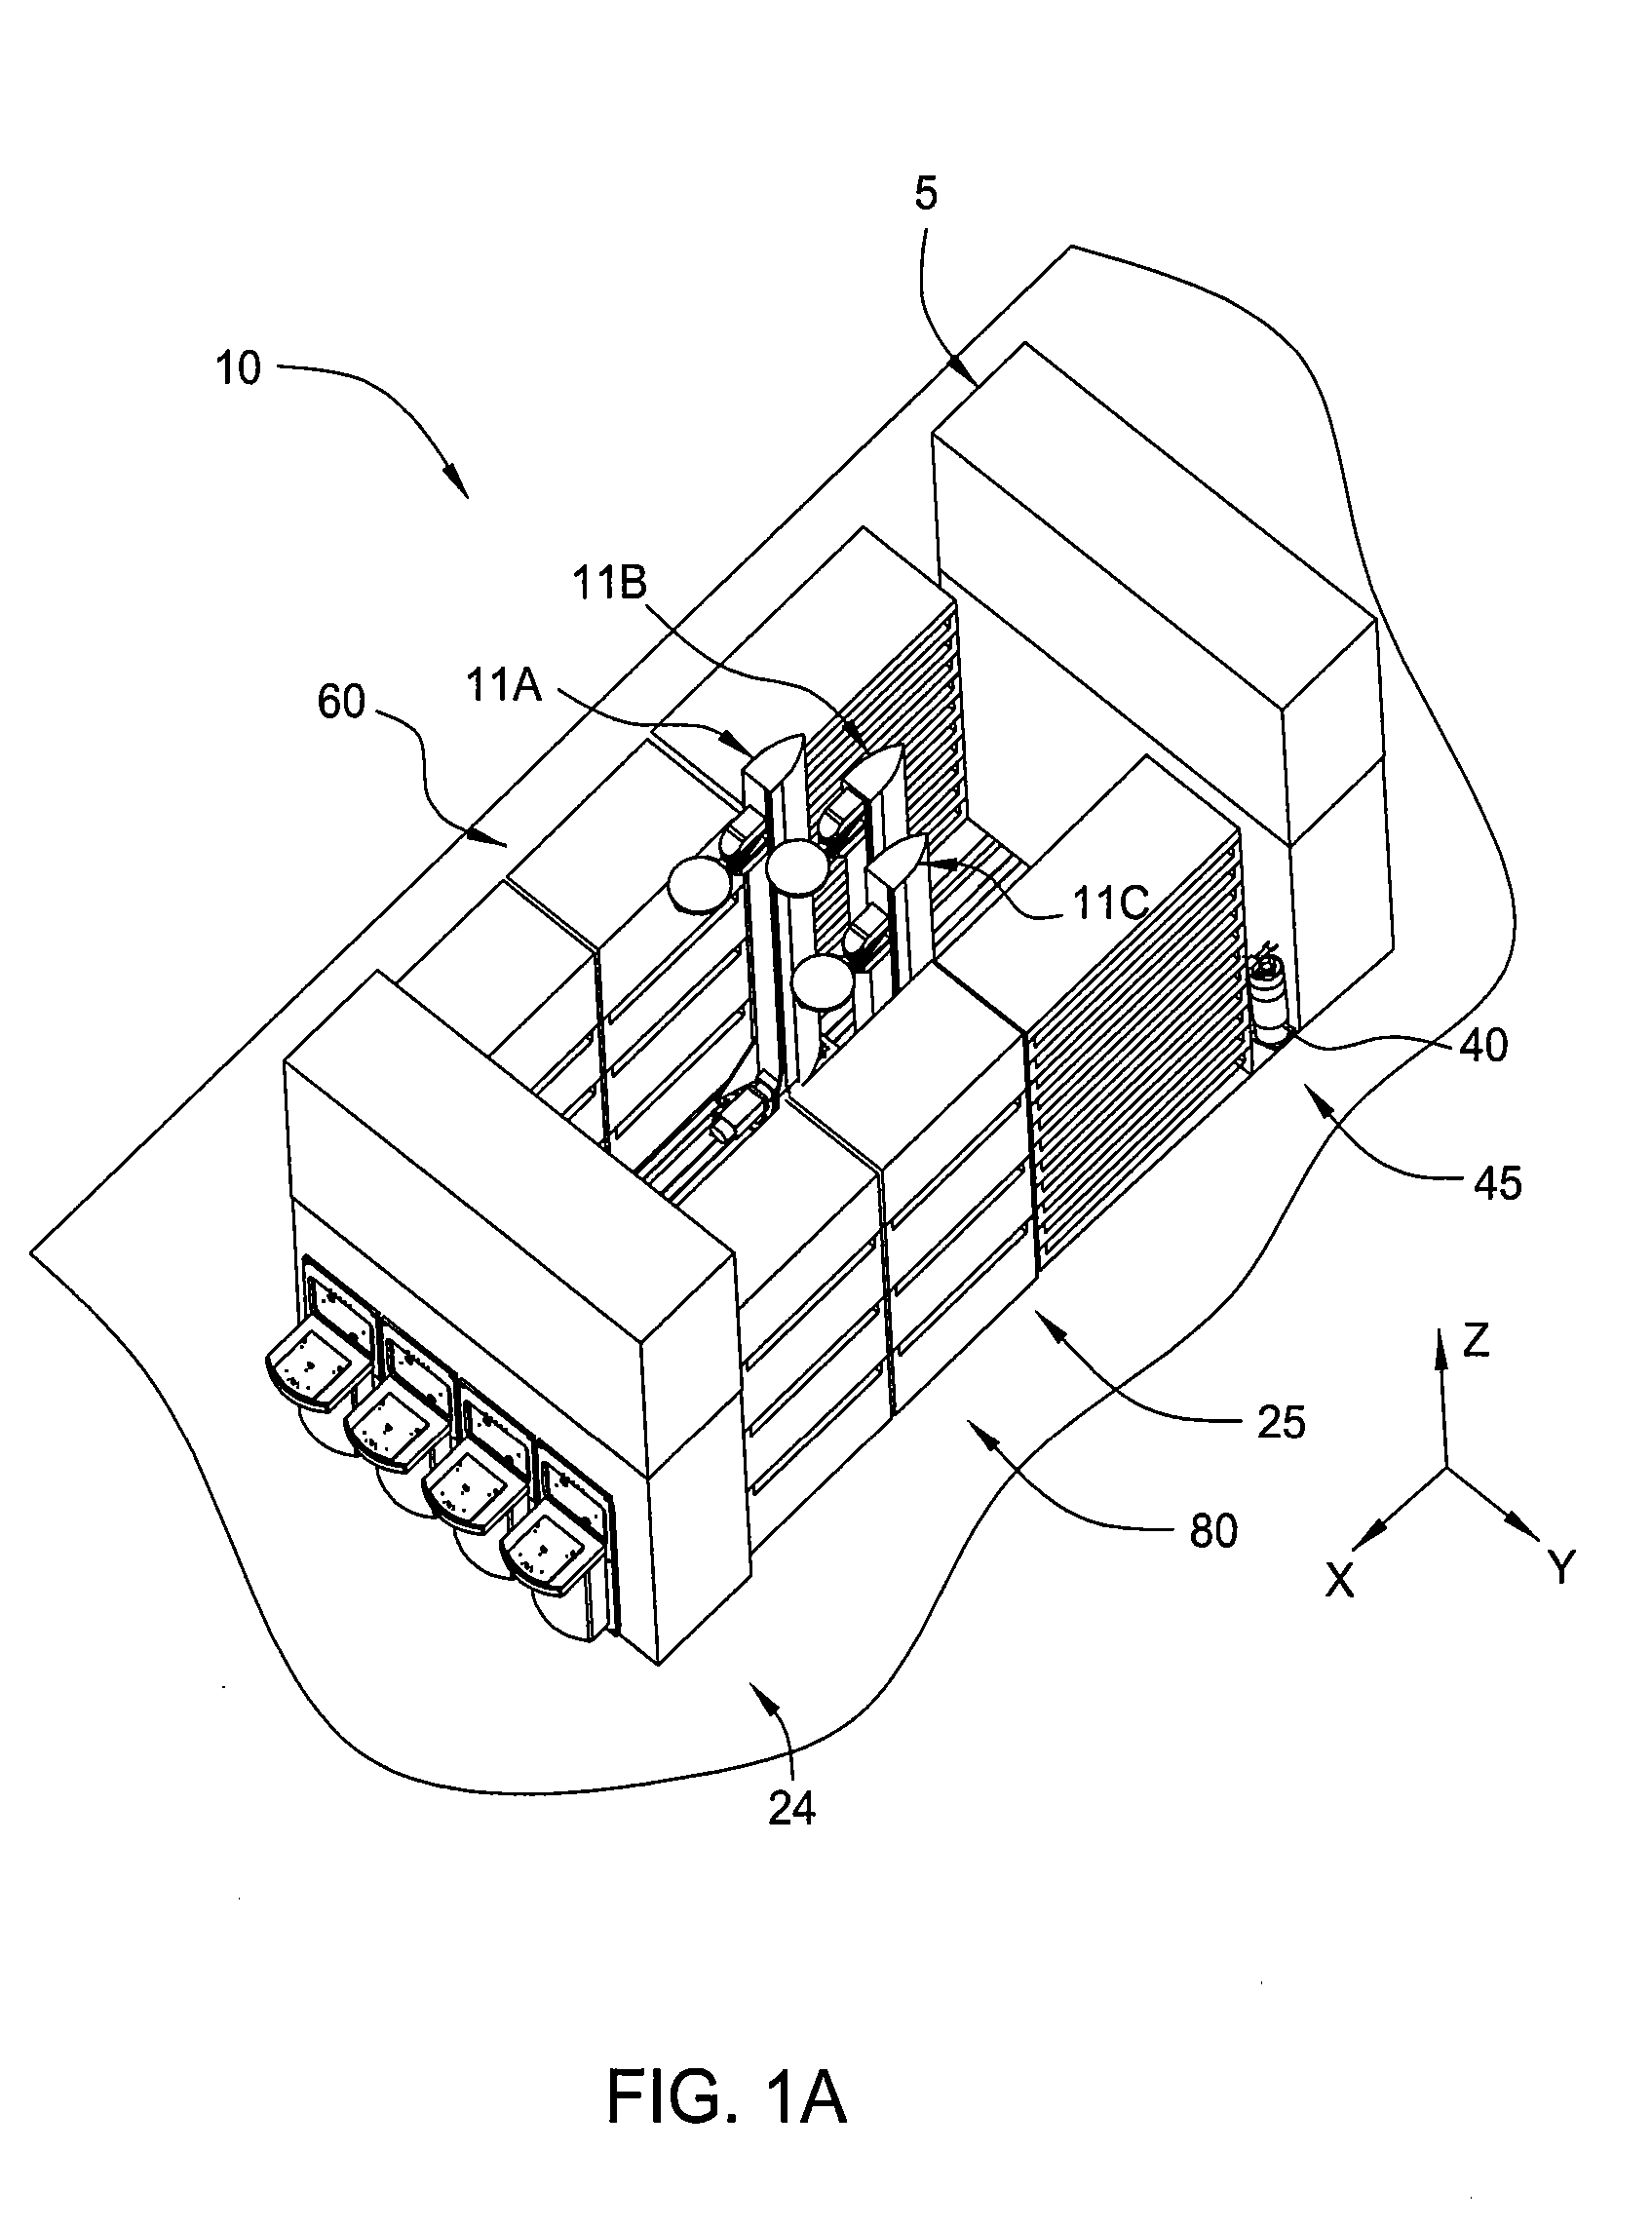 Scheduling method for processing equipment